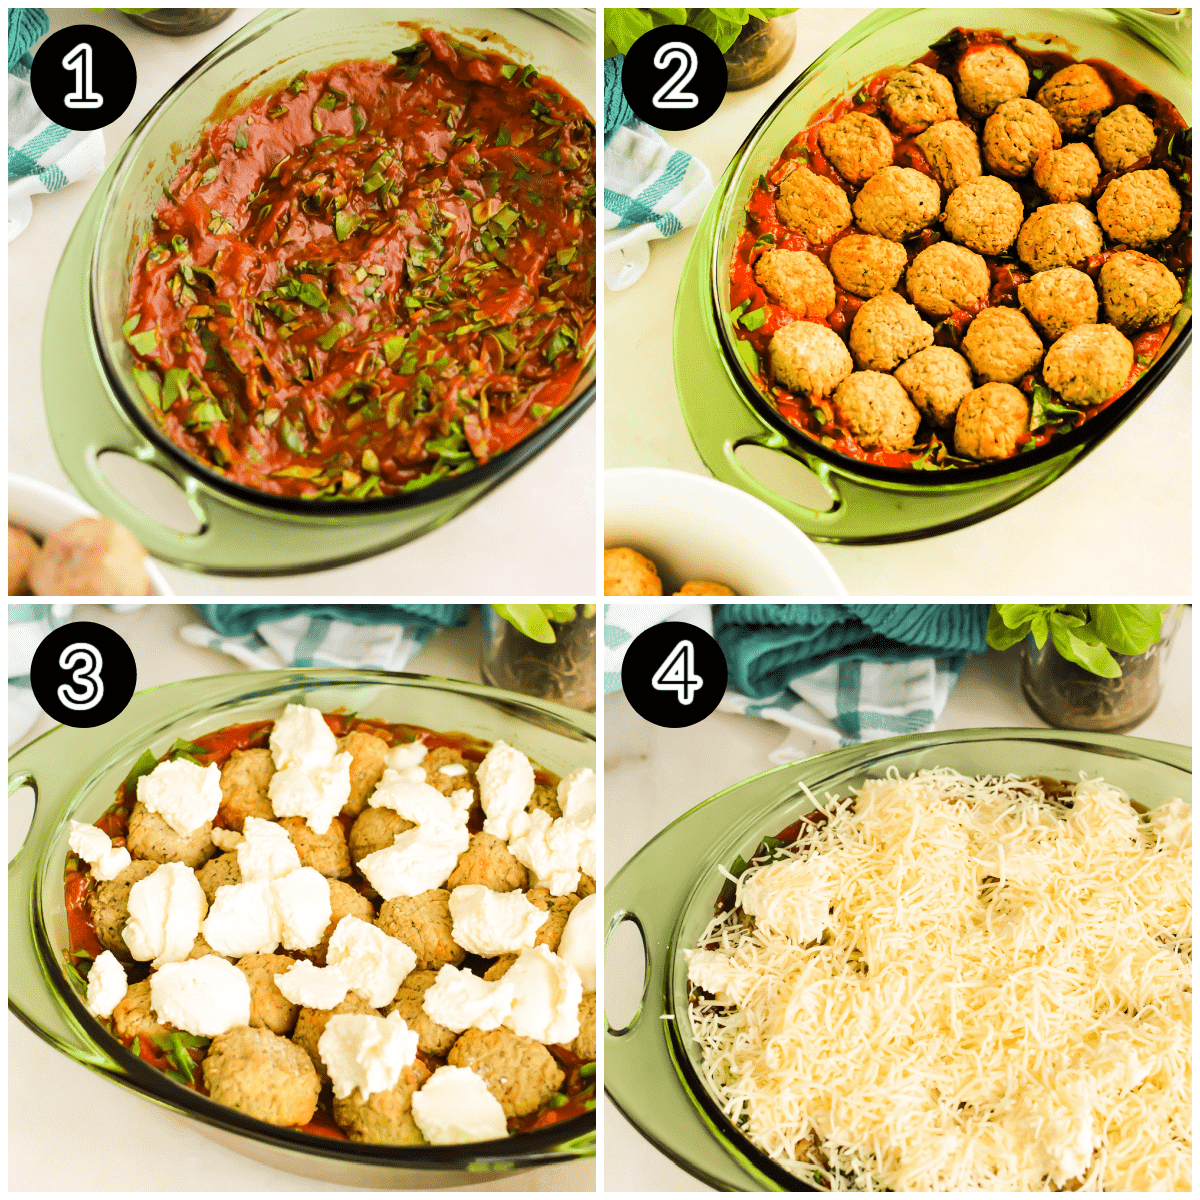 How to Make Meatball Casserole collage image.